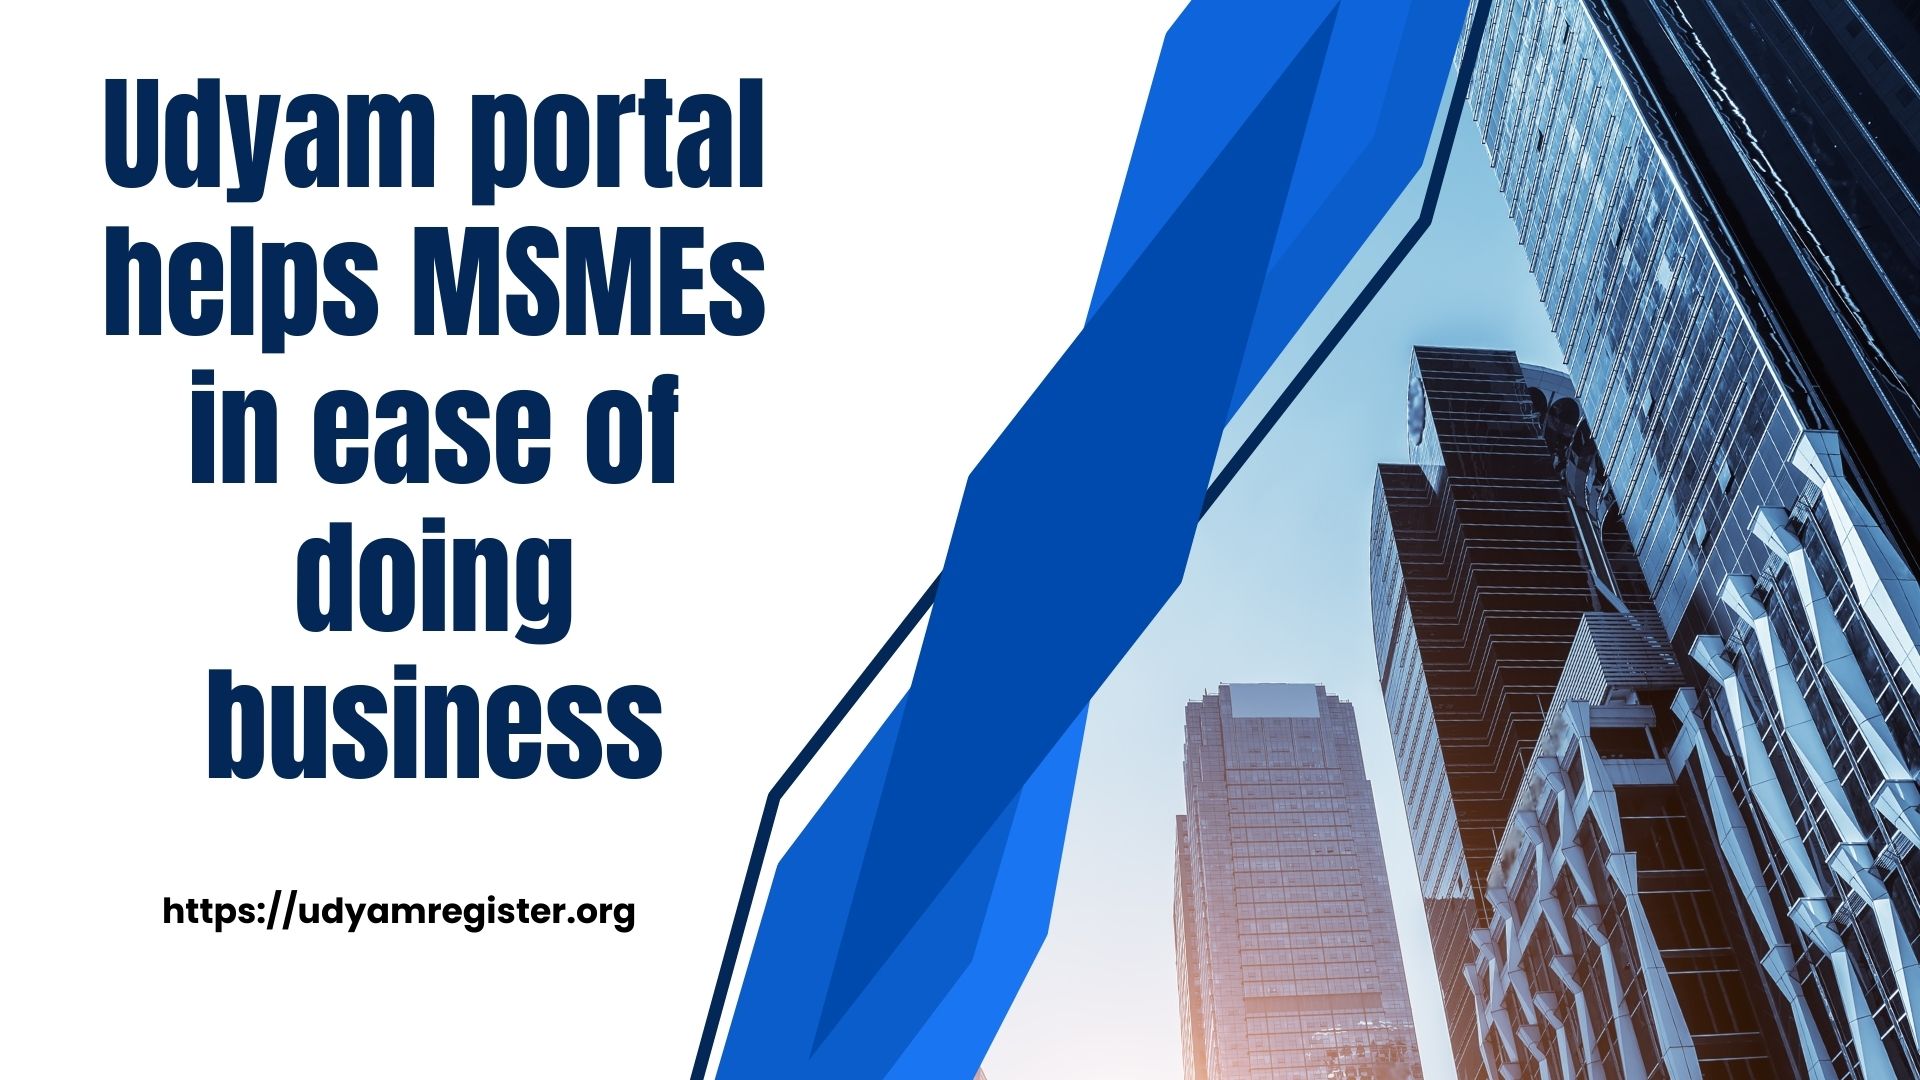 Udyam portal helps MSMEs in ease of doing business